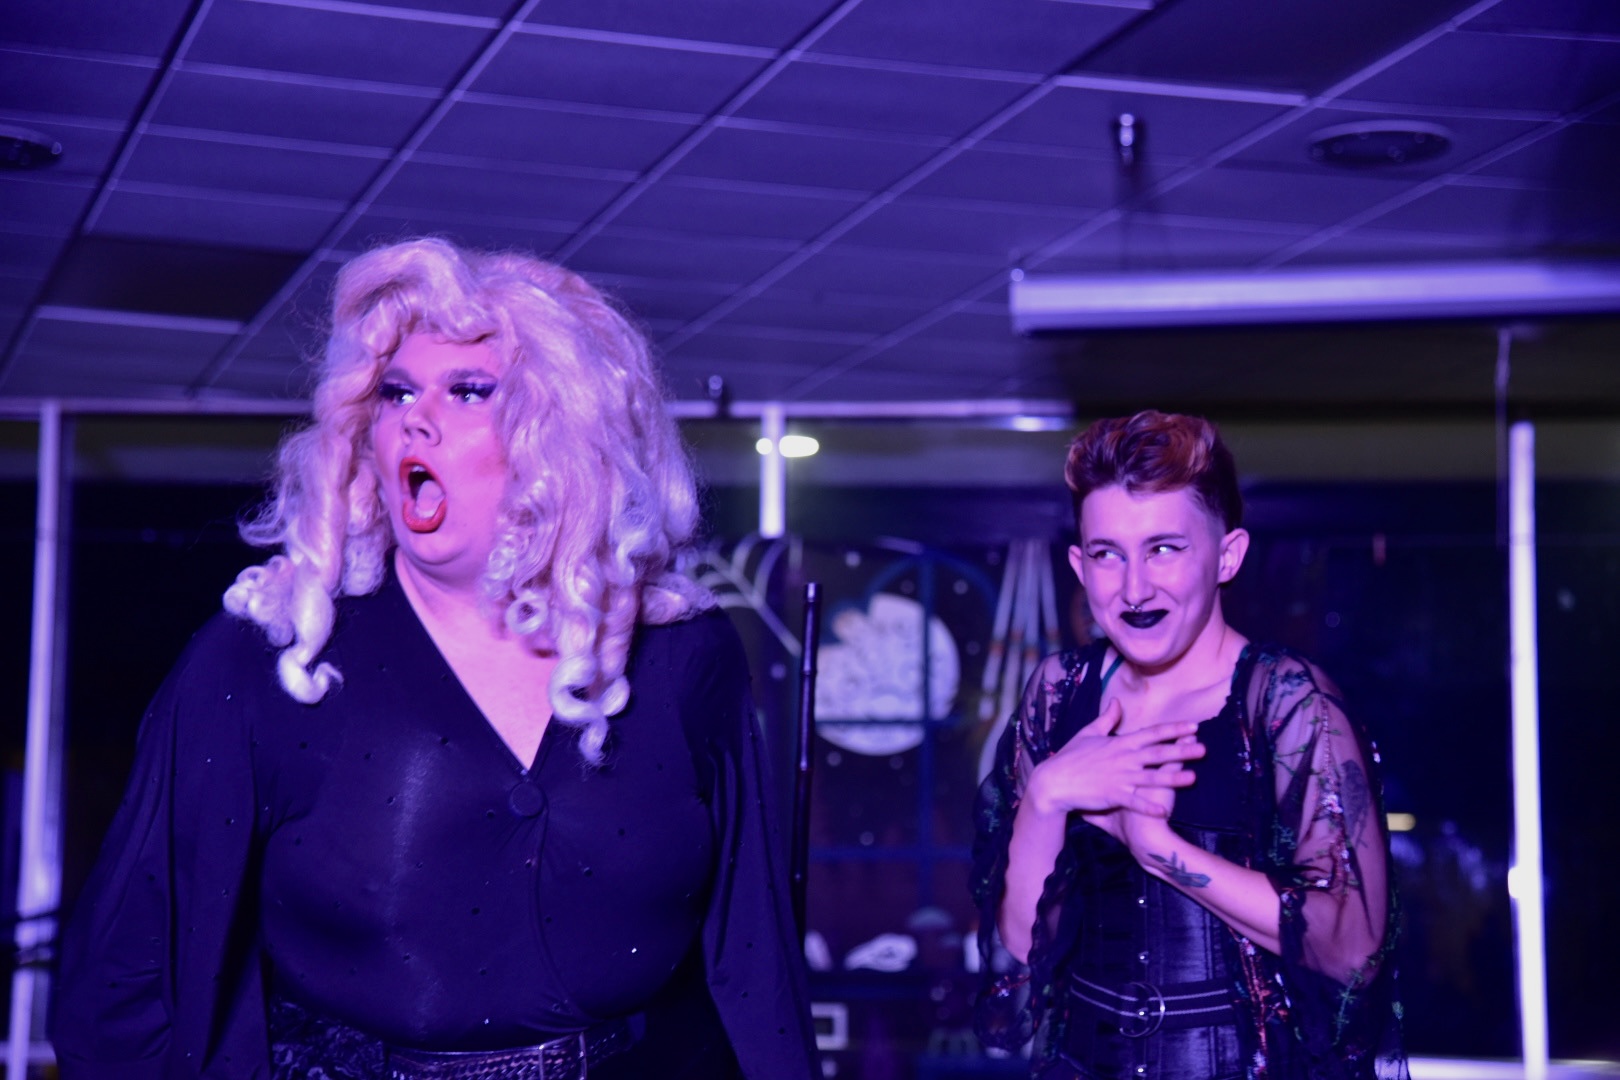 Two Drag Performers 10/31 - By Cammie Breuer